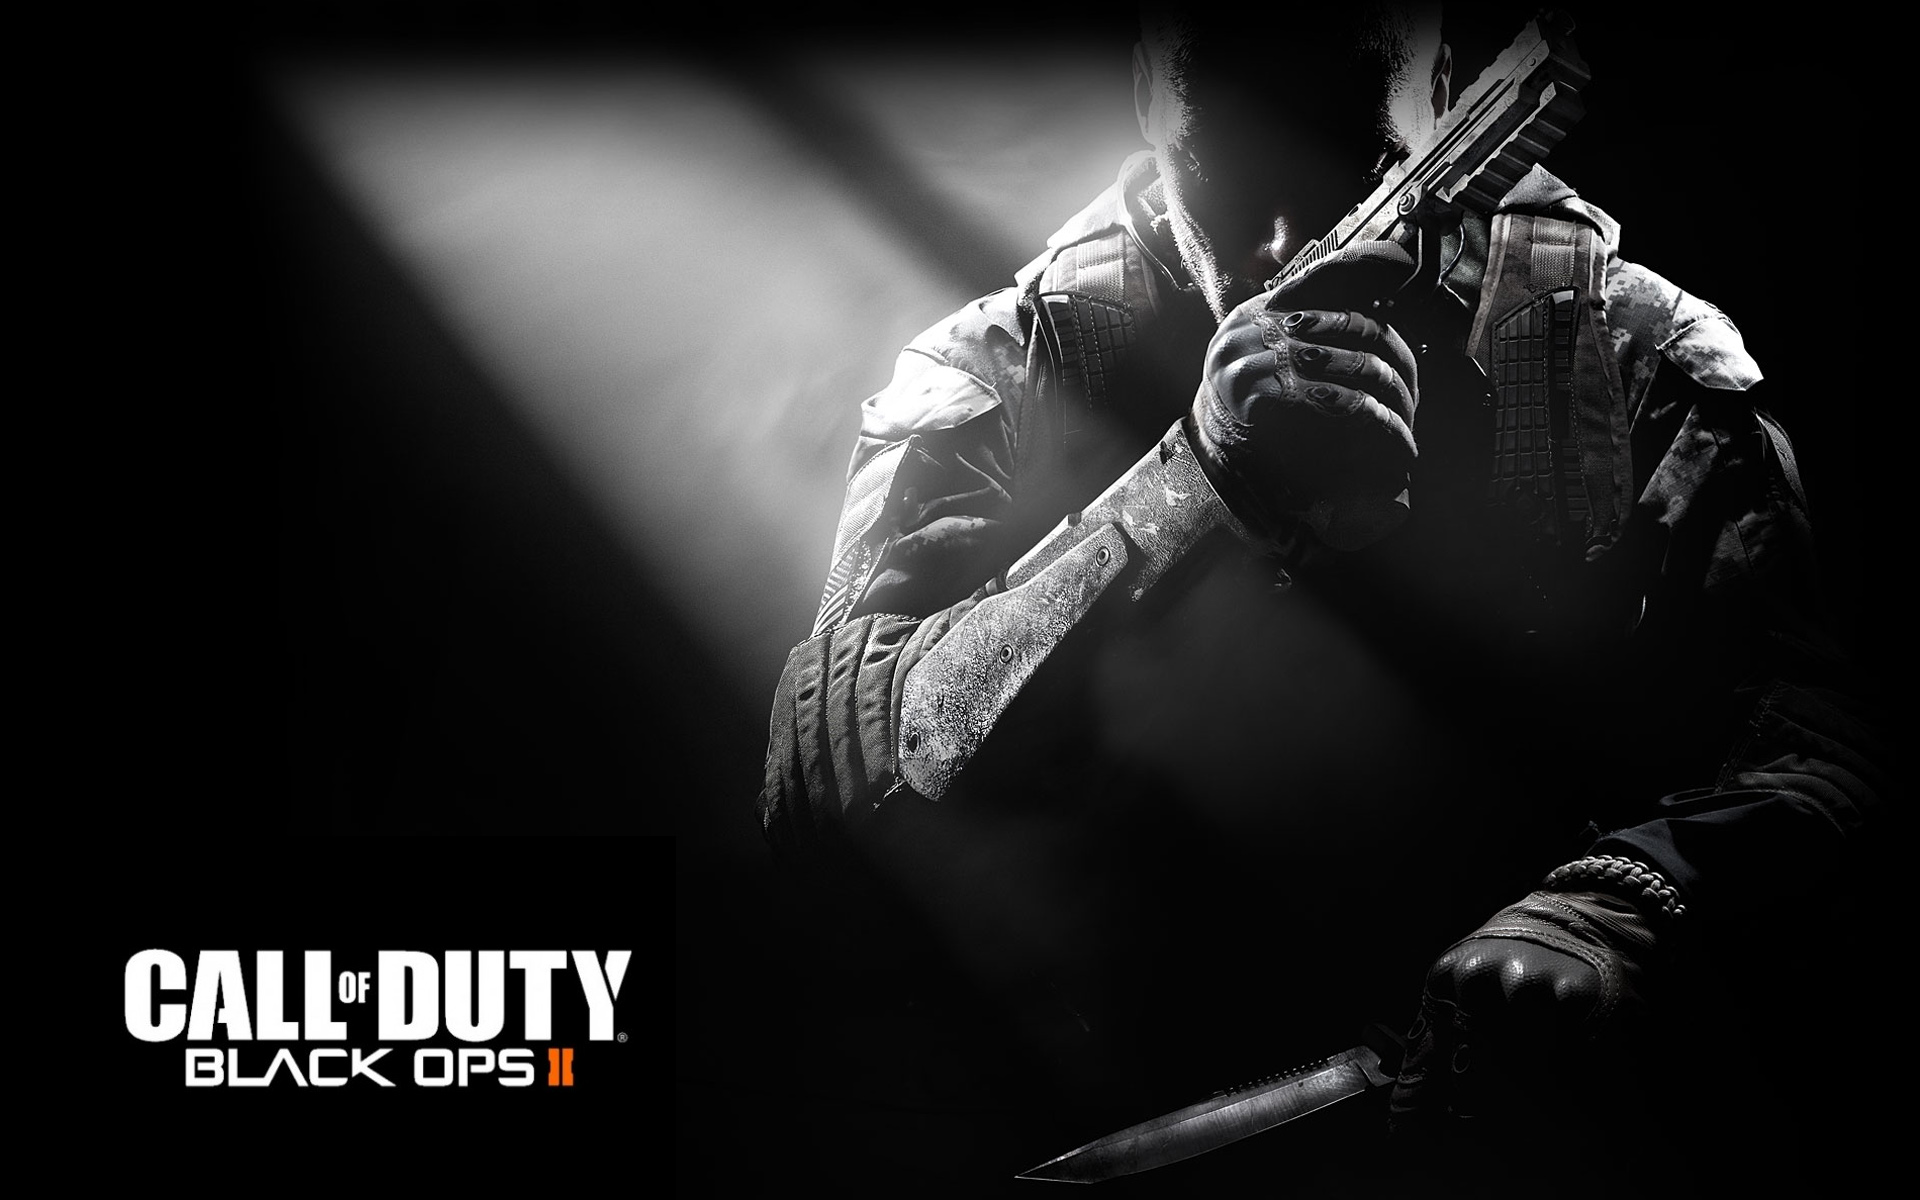 Call of Duty Black Ops 2 Wallpapers HD Wallpapers 1920x1200